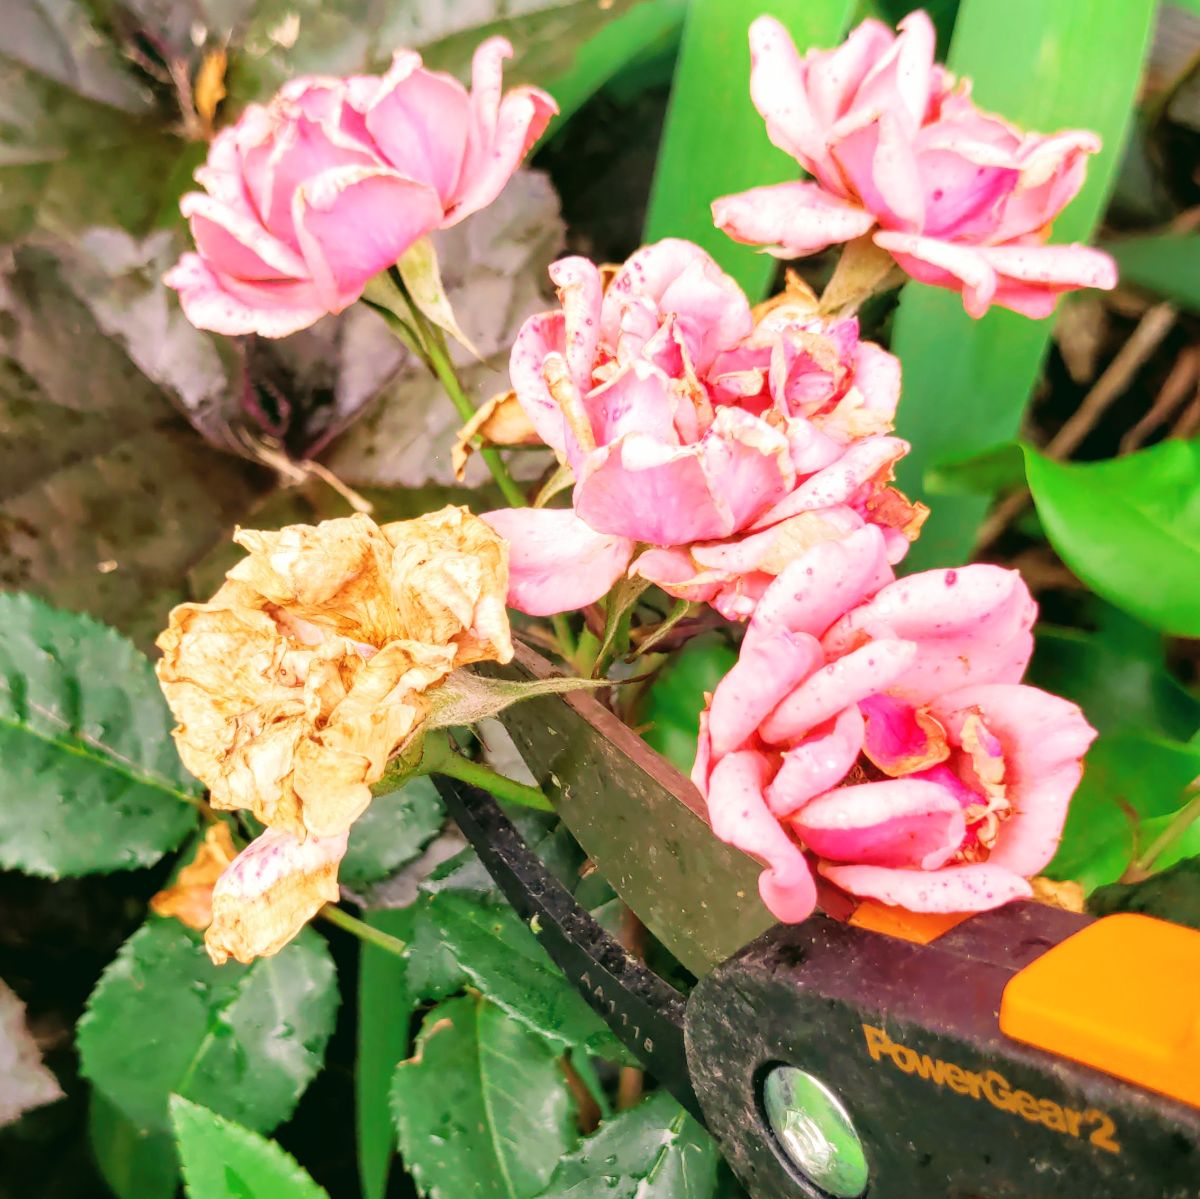 Deadheading knockout roses is easy and produces amazing results!